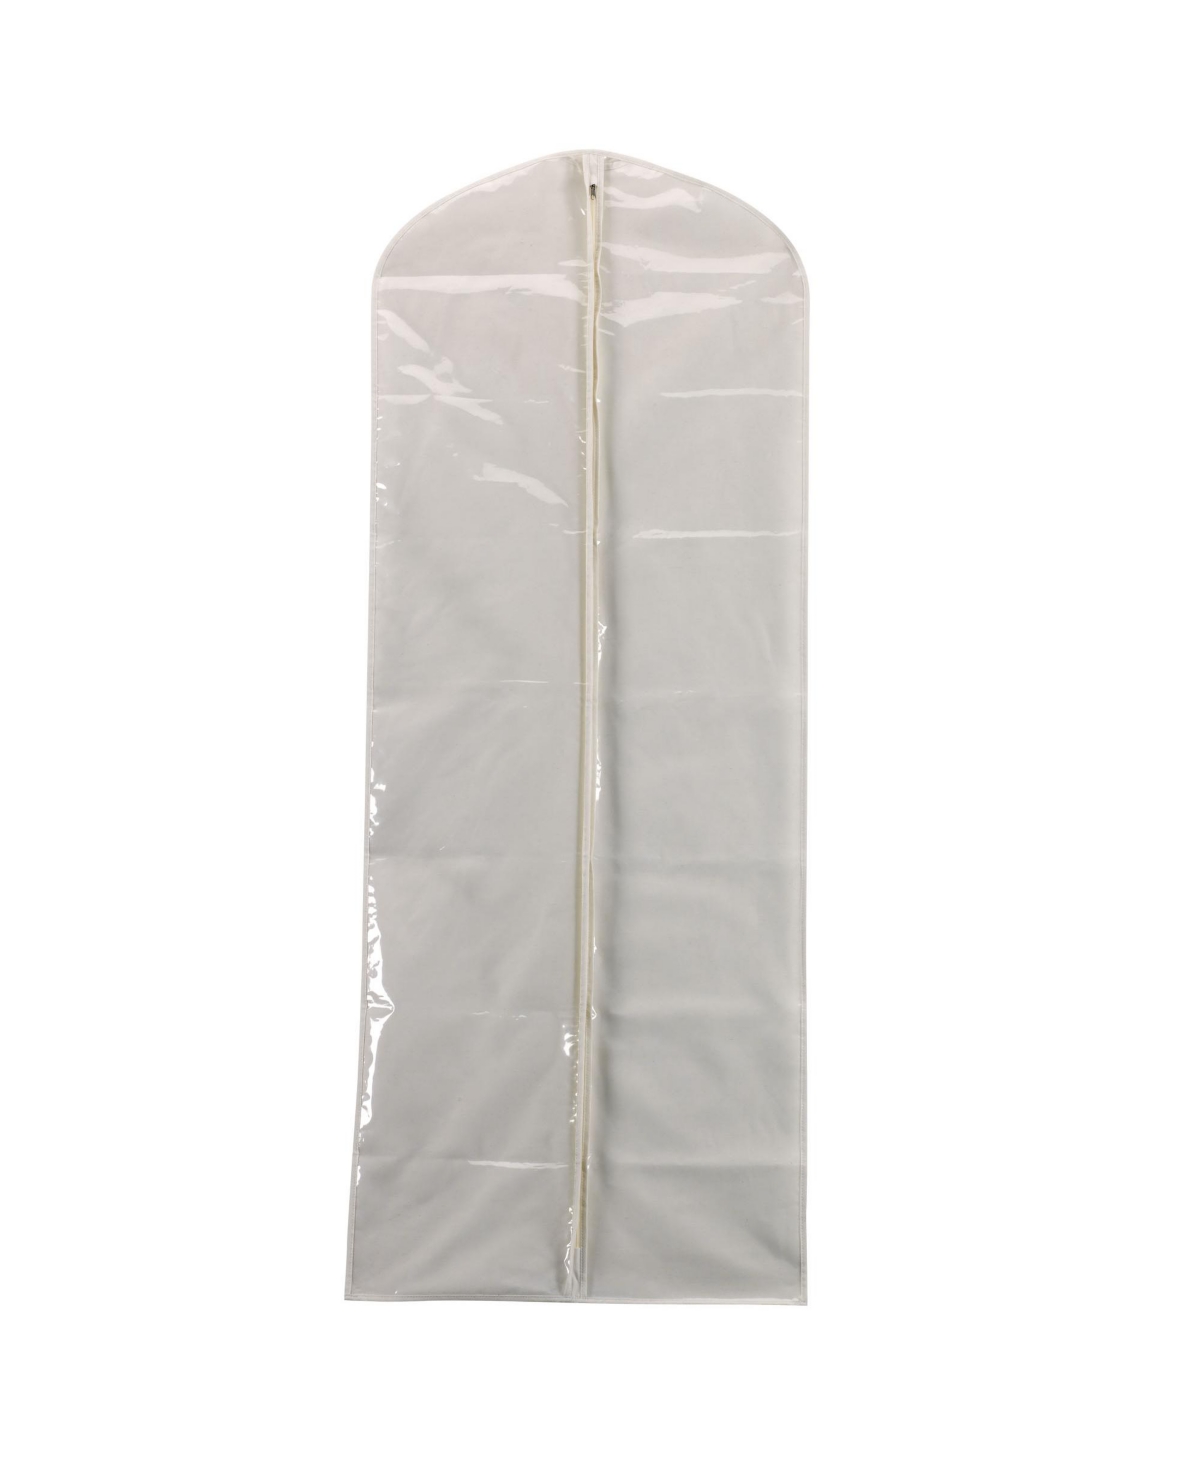 Gown Protector Bag